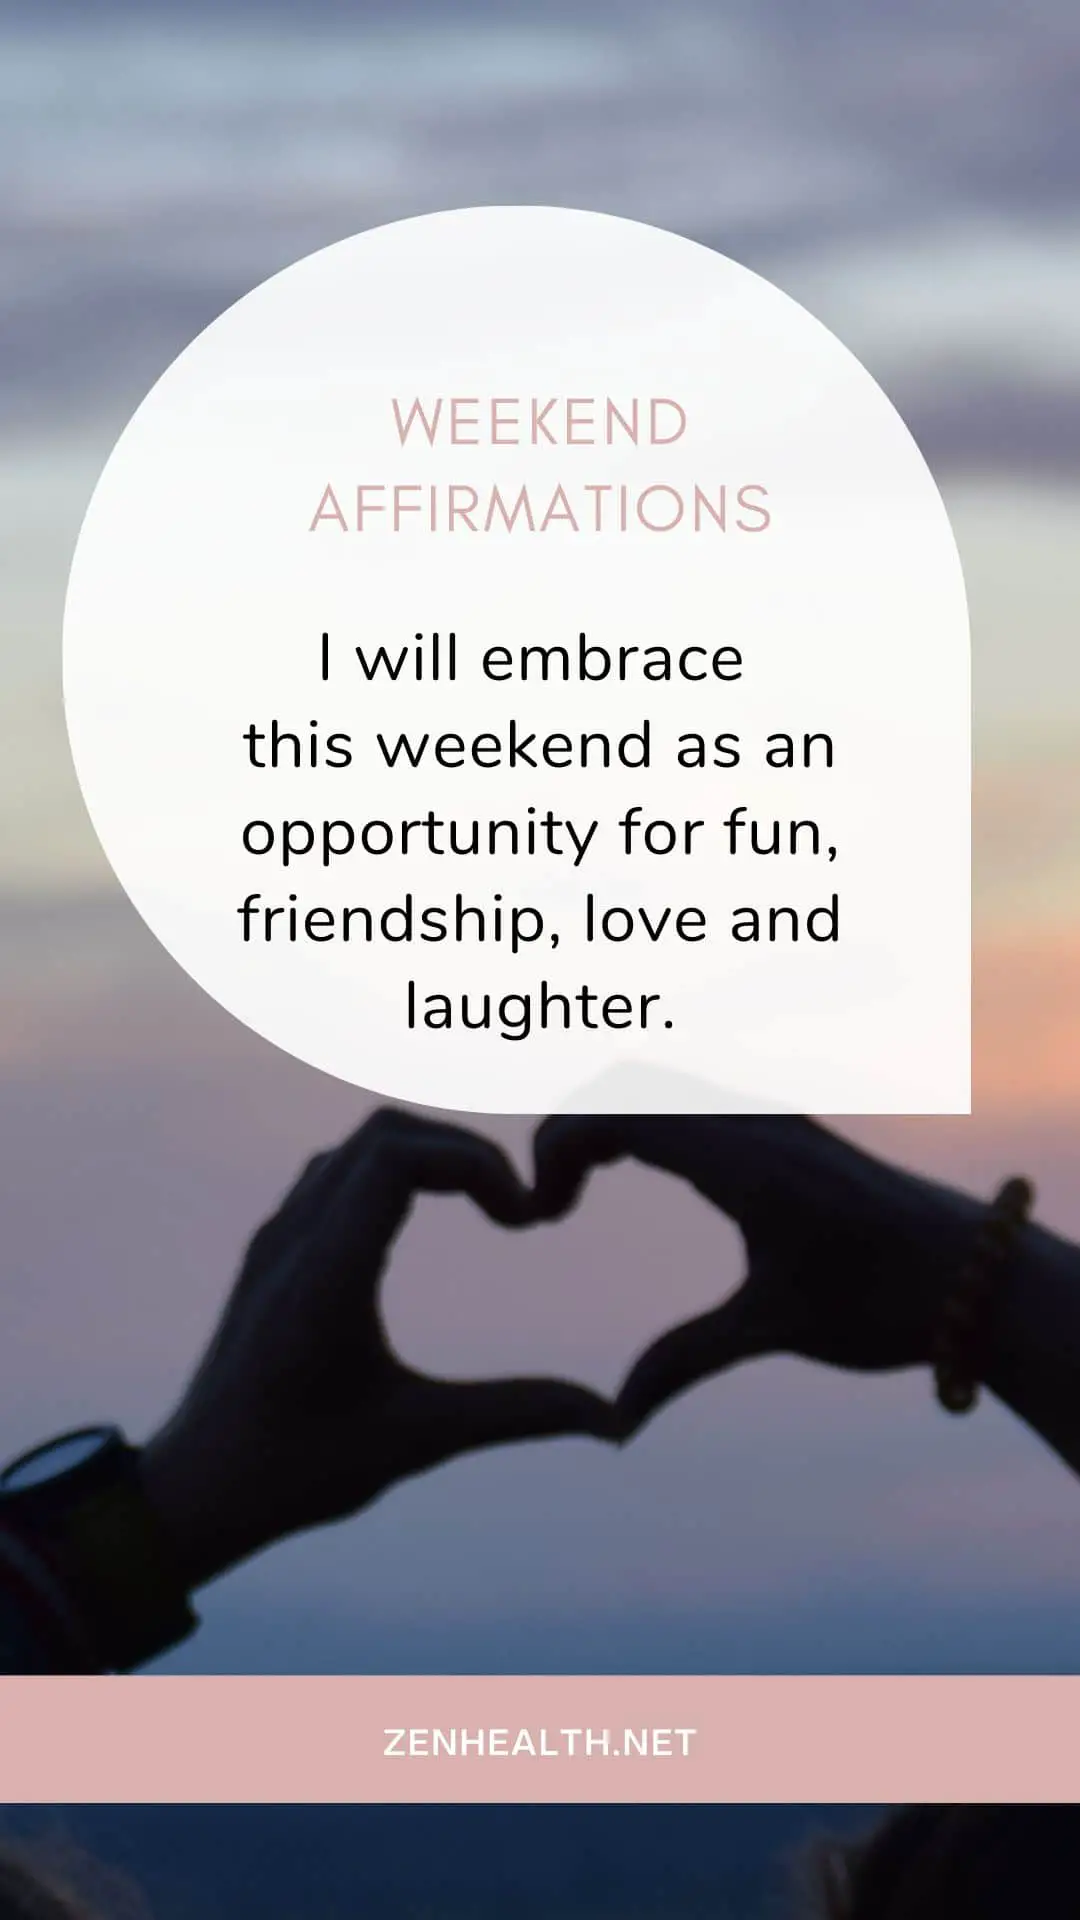 weekend affirmations: I will embrace this weekend as an opportunity for fun, friendship, love and laughter